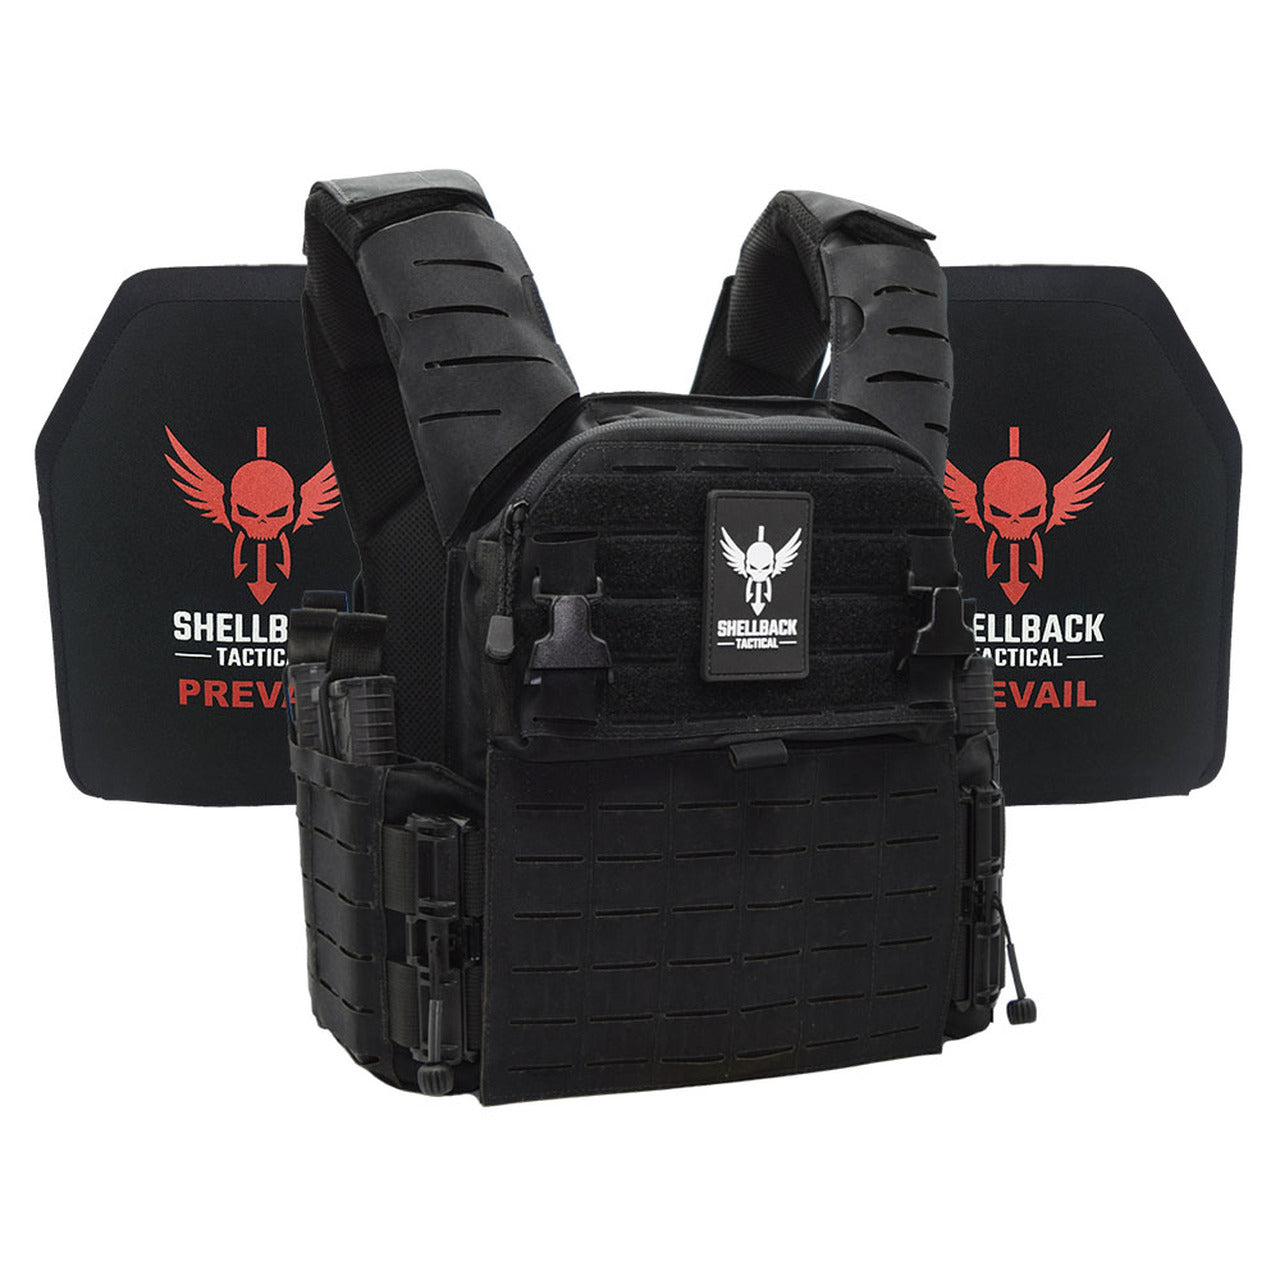 A Shellback Tactical Banshee Elite 3.0 Active Shooter Kit with Level IV 1155 Plates and a red logo on it.